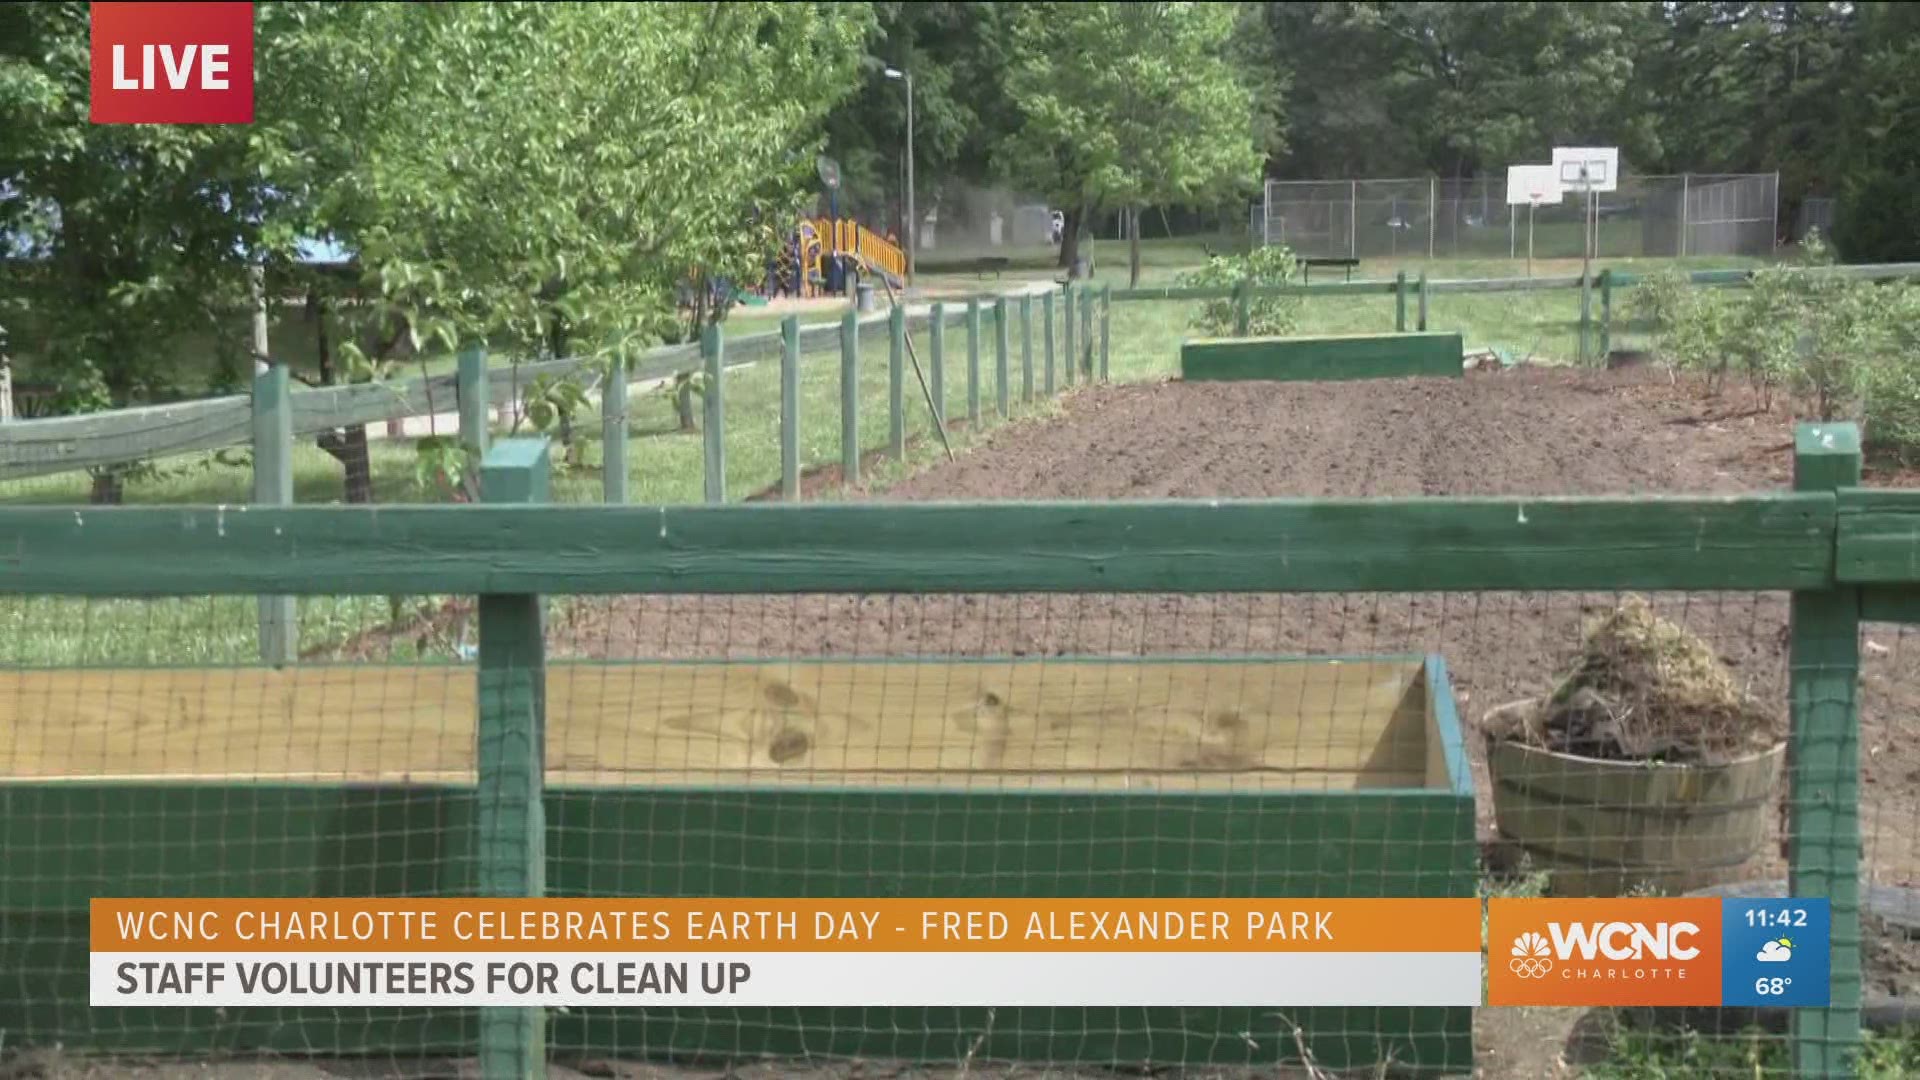 WCNC Charlotte spent Tuesday volunteering with Mecklenburg County Park and Recreation and The Males Place ahead of Earth Day at Fred Alexander Park in Charlotte.